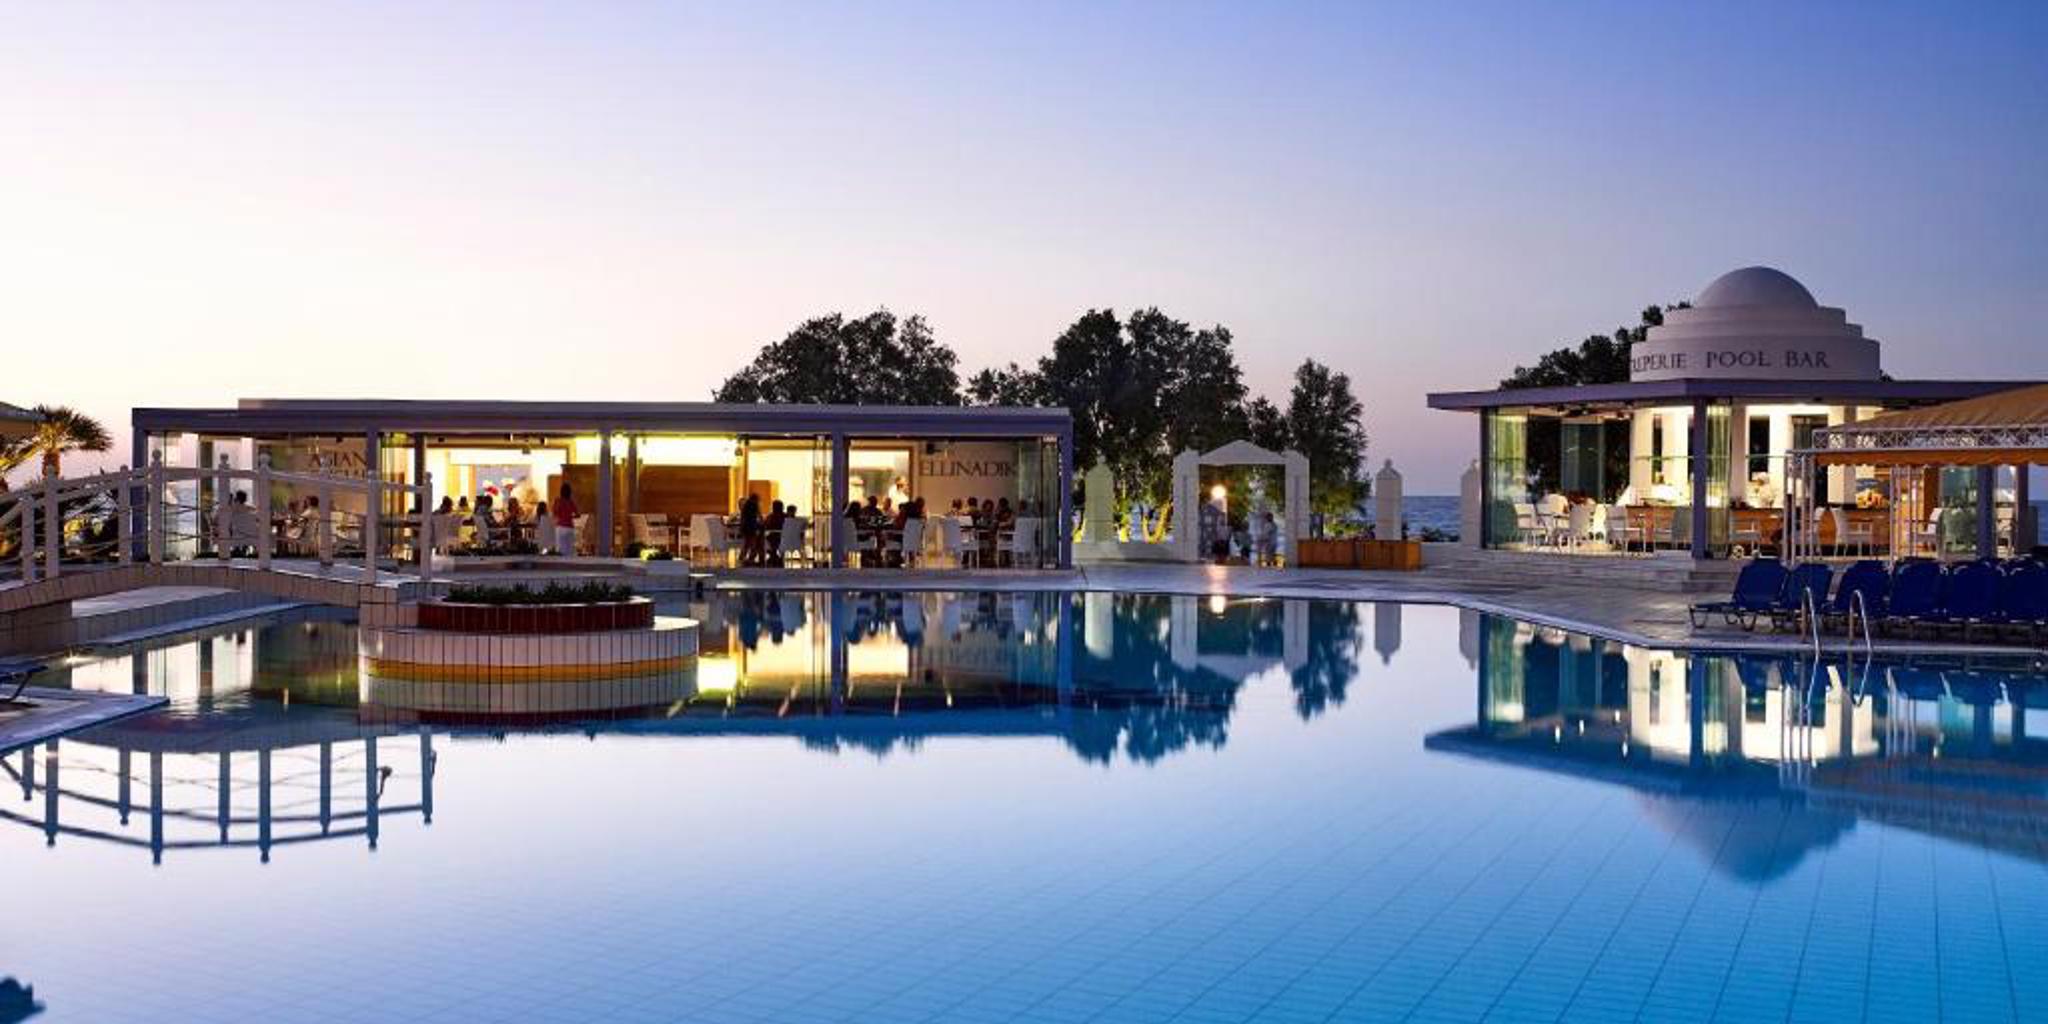 G Hotel Collection has acquired two historic hotels in Crete and Corfu